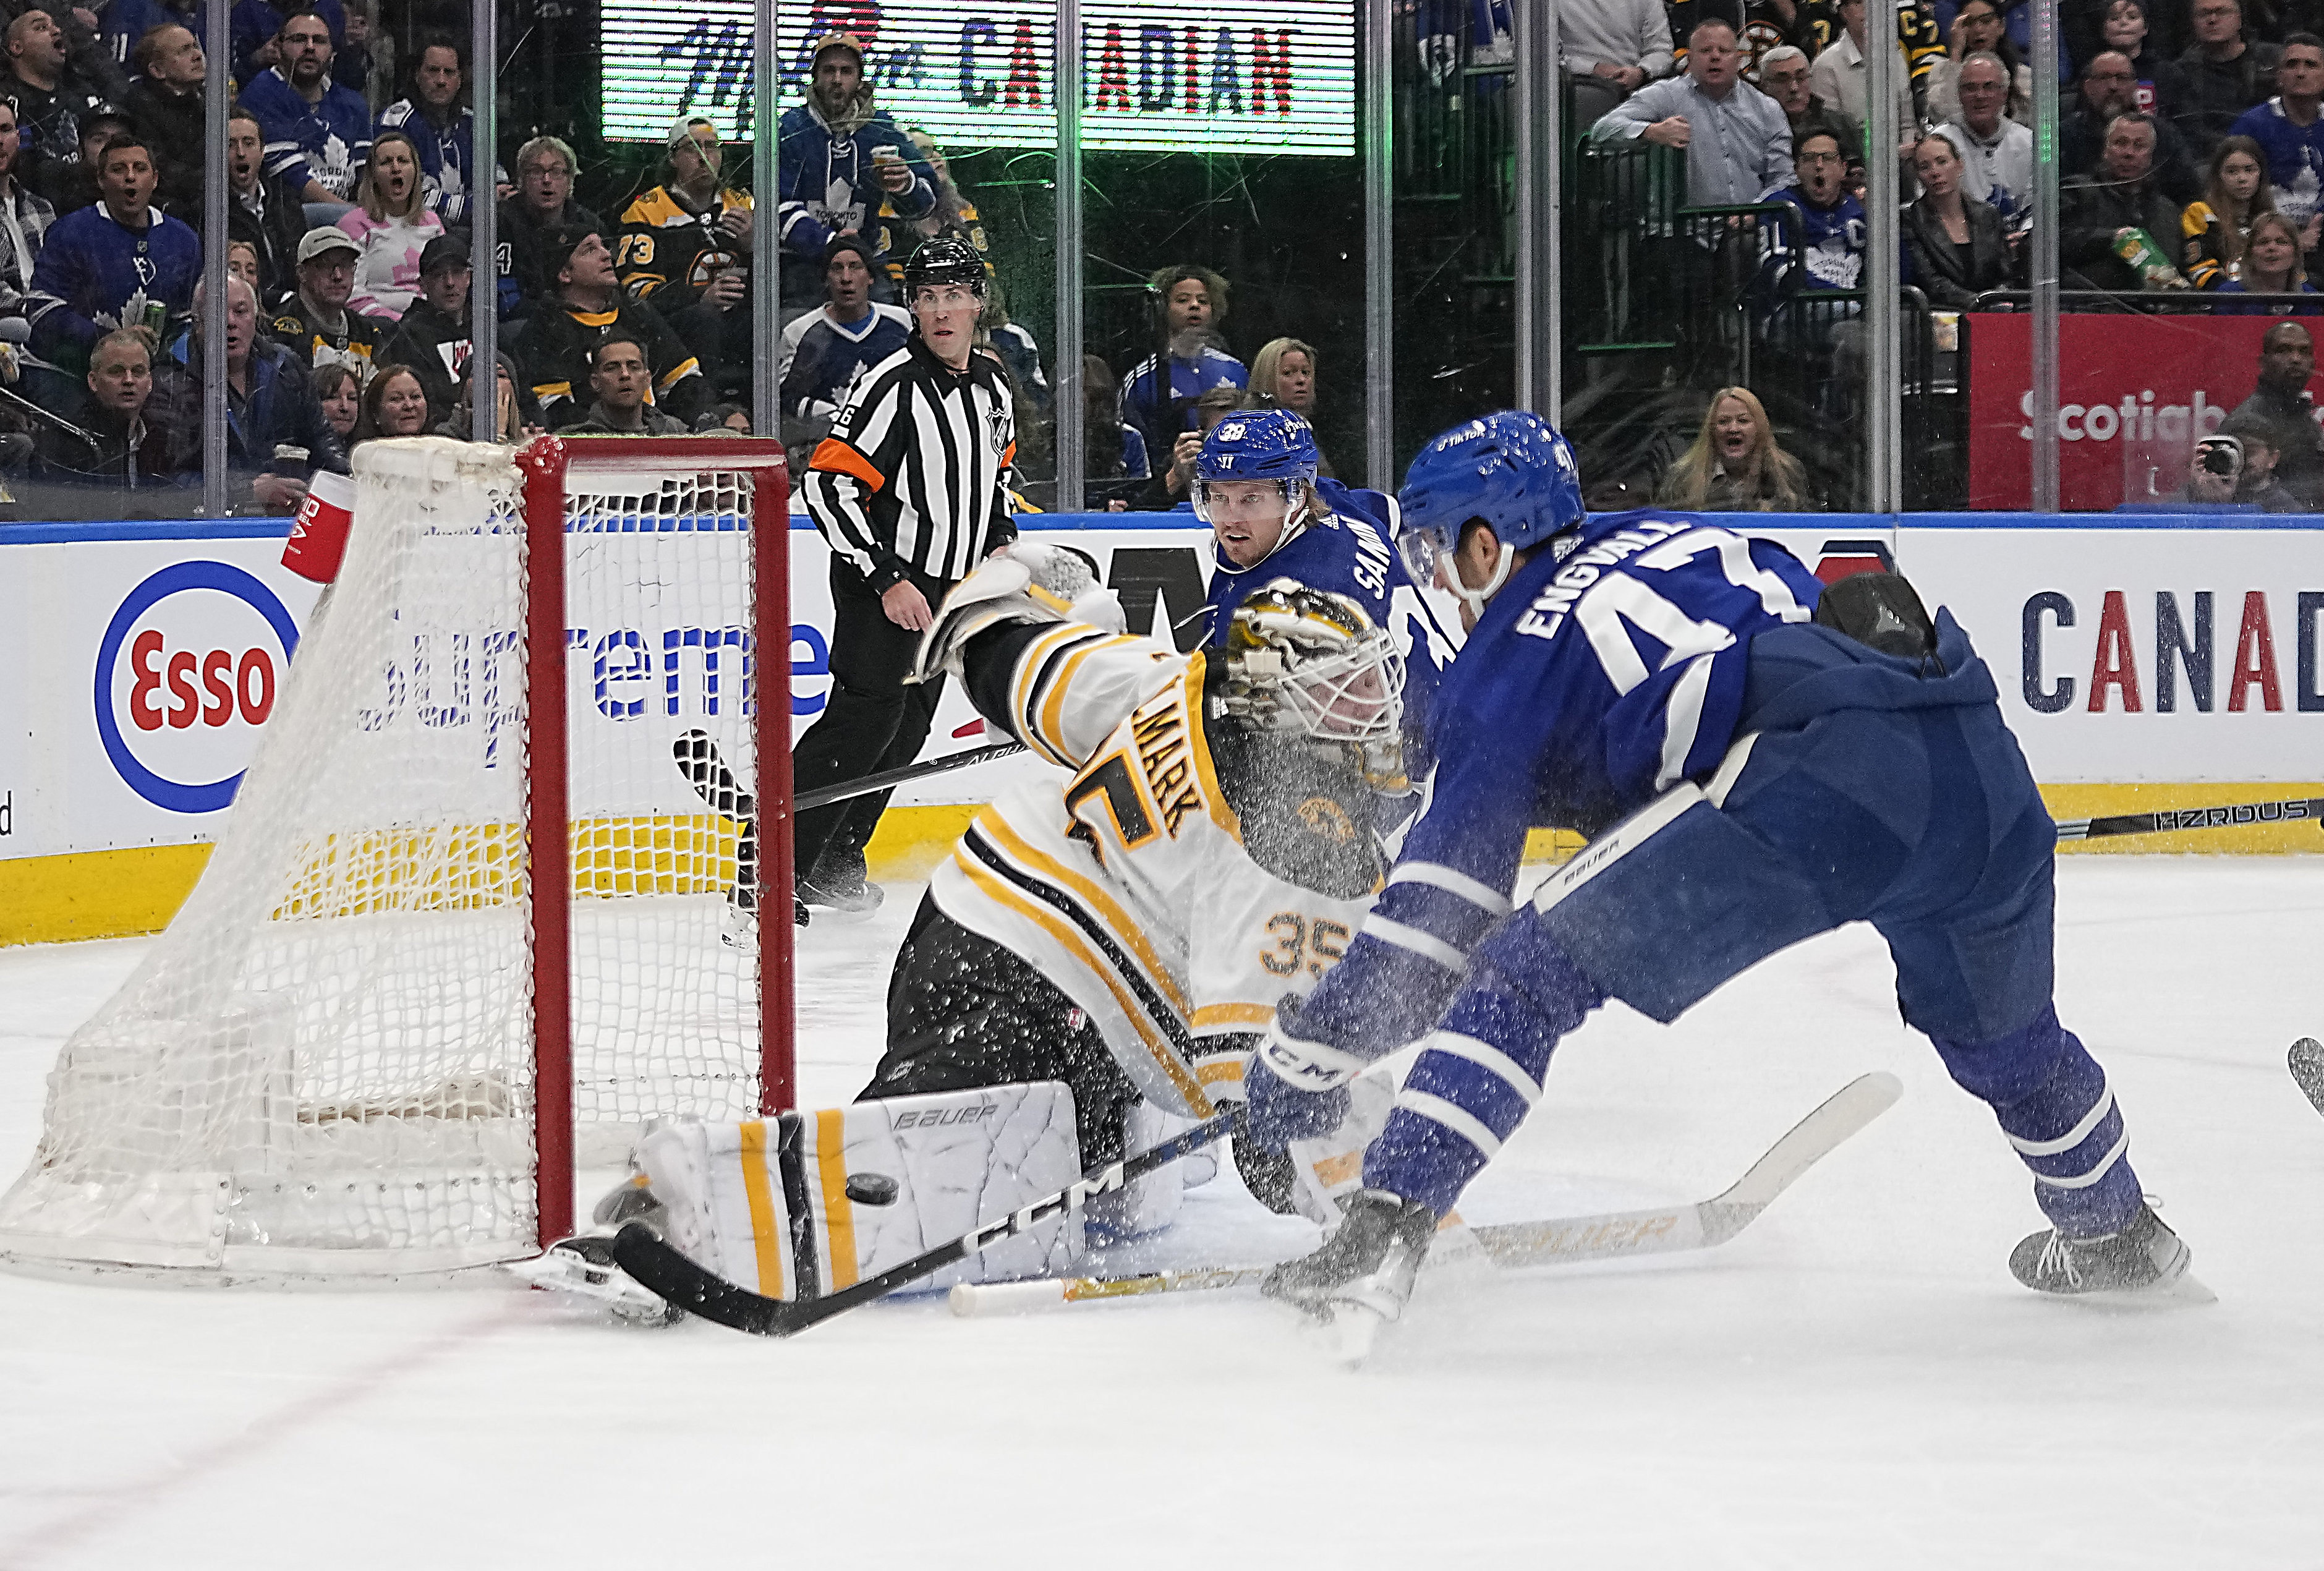 Loss is a reality check for champion Bruins - The Boston Globe